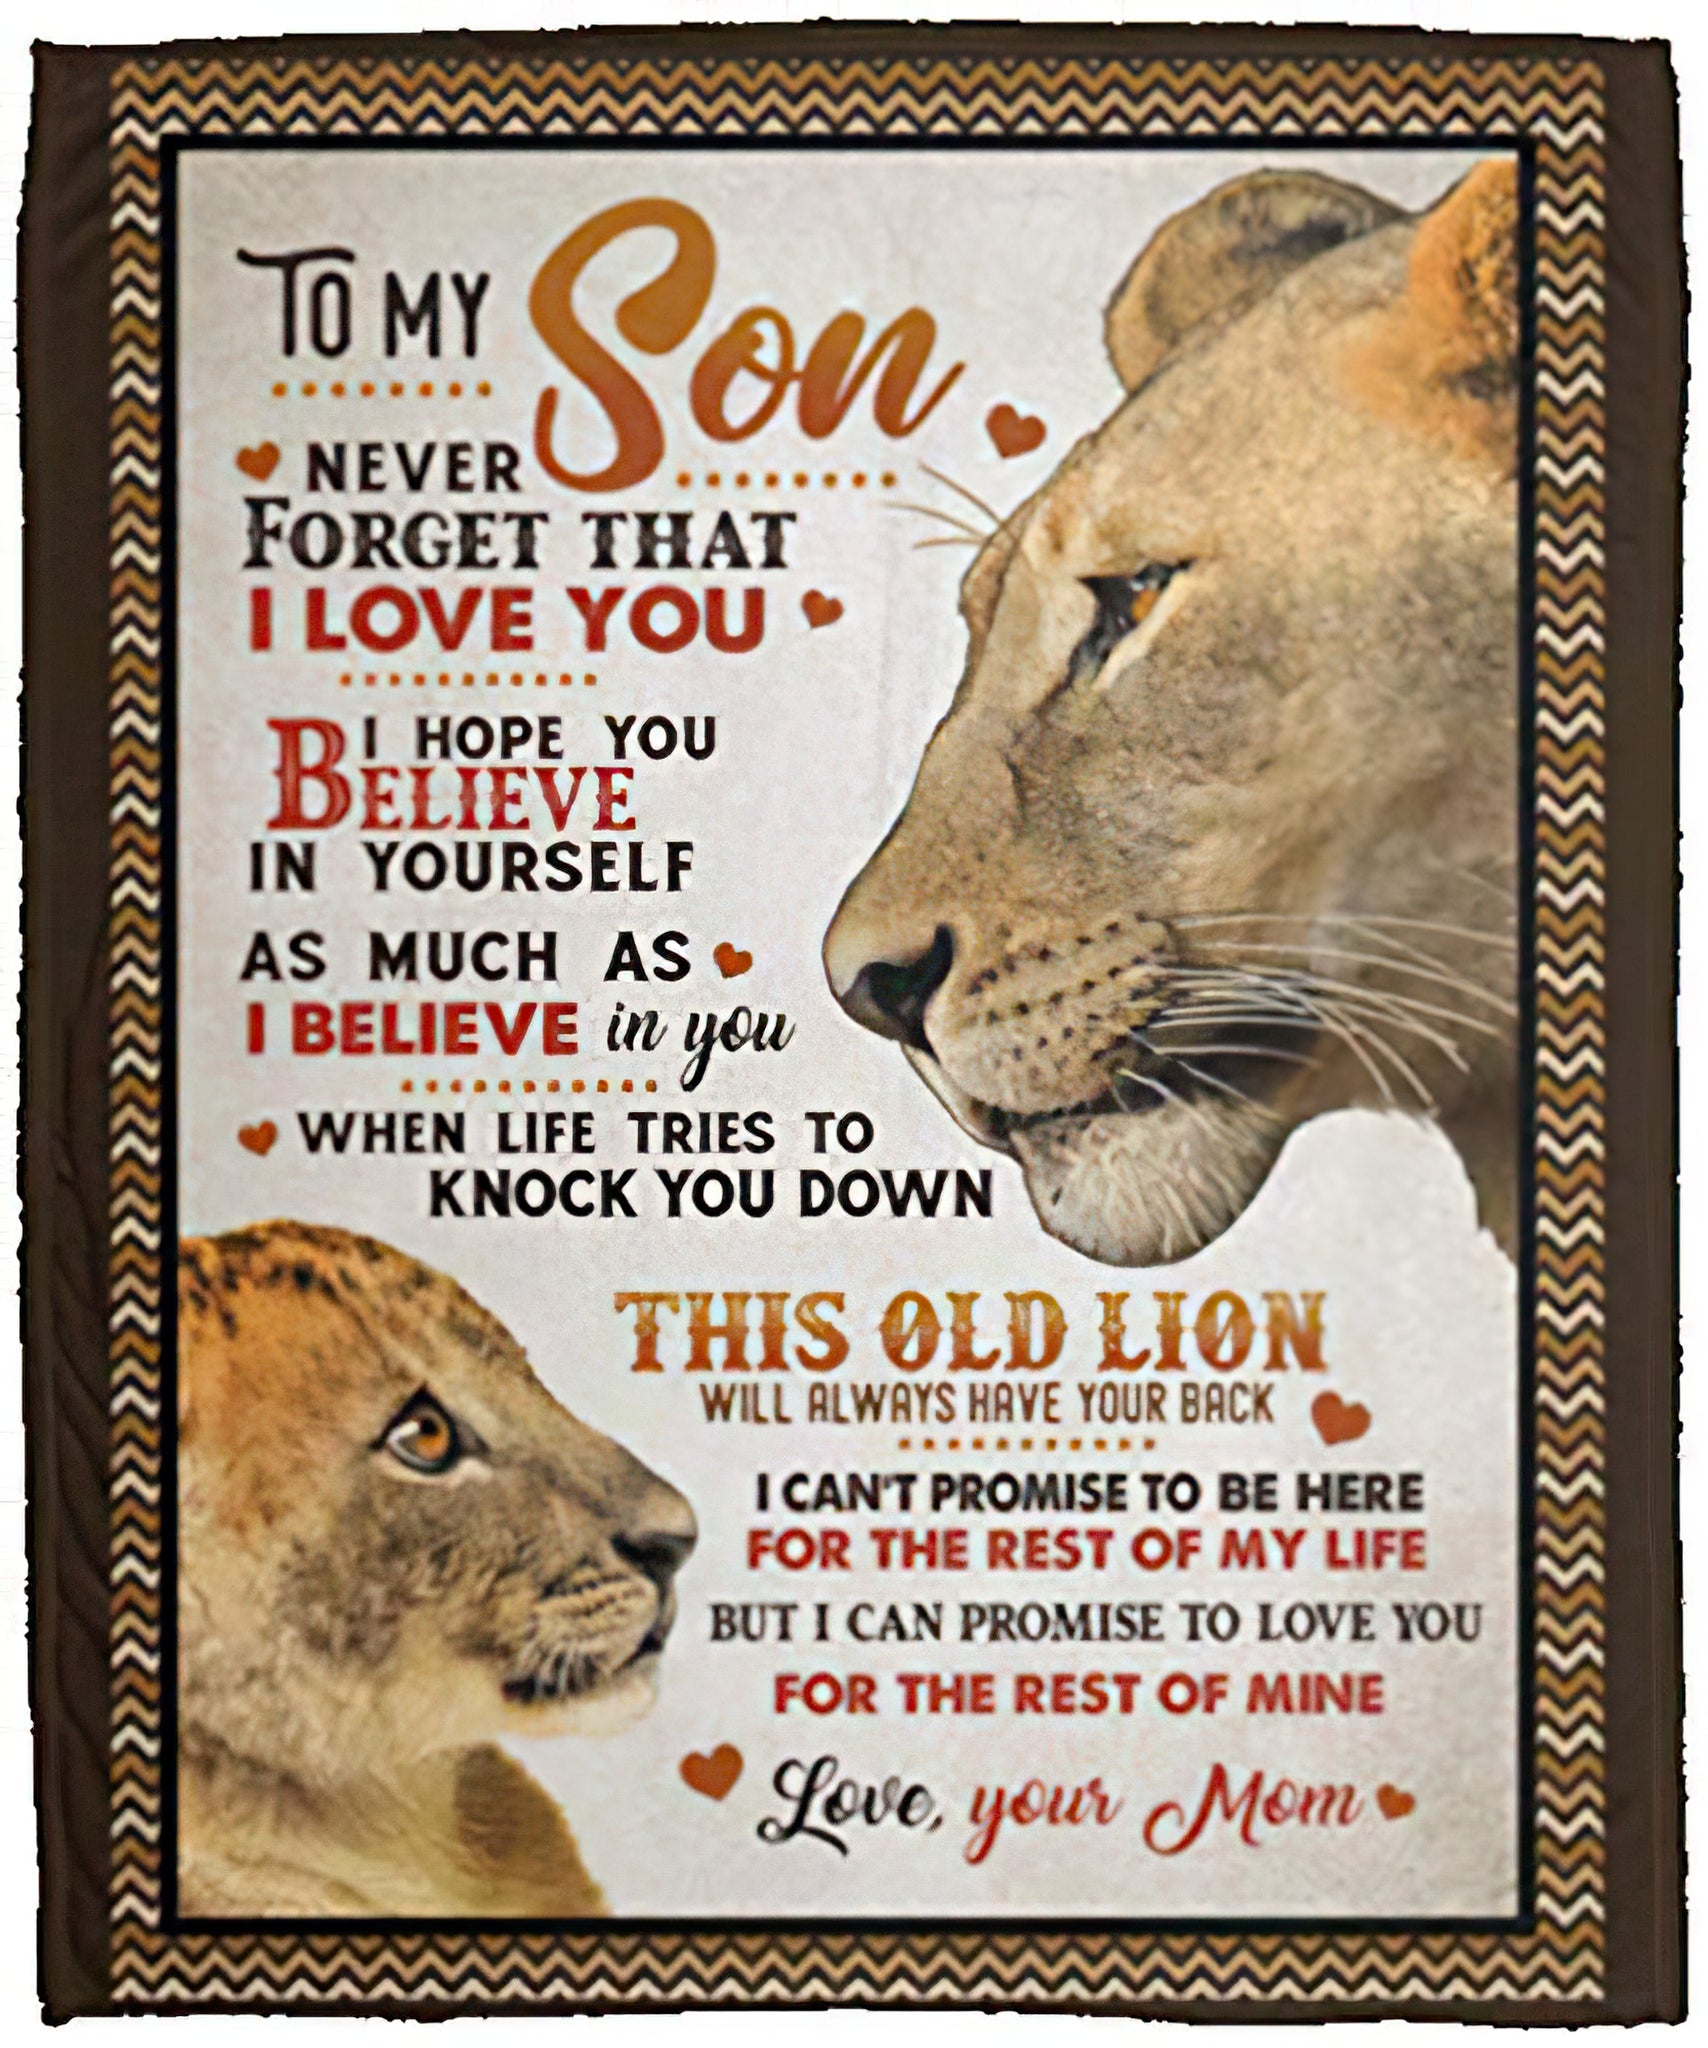 To My Son Never Forget That I Love You Hope You Believe In Yourself Old Lion